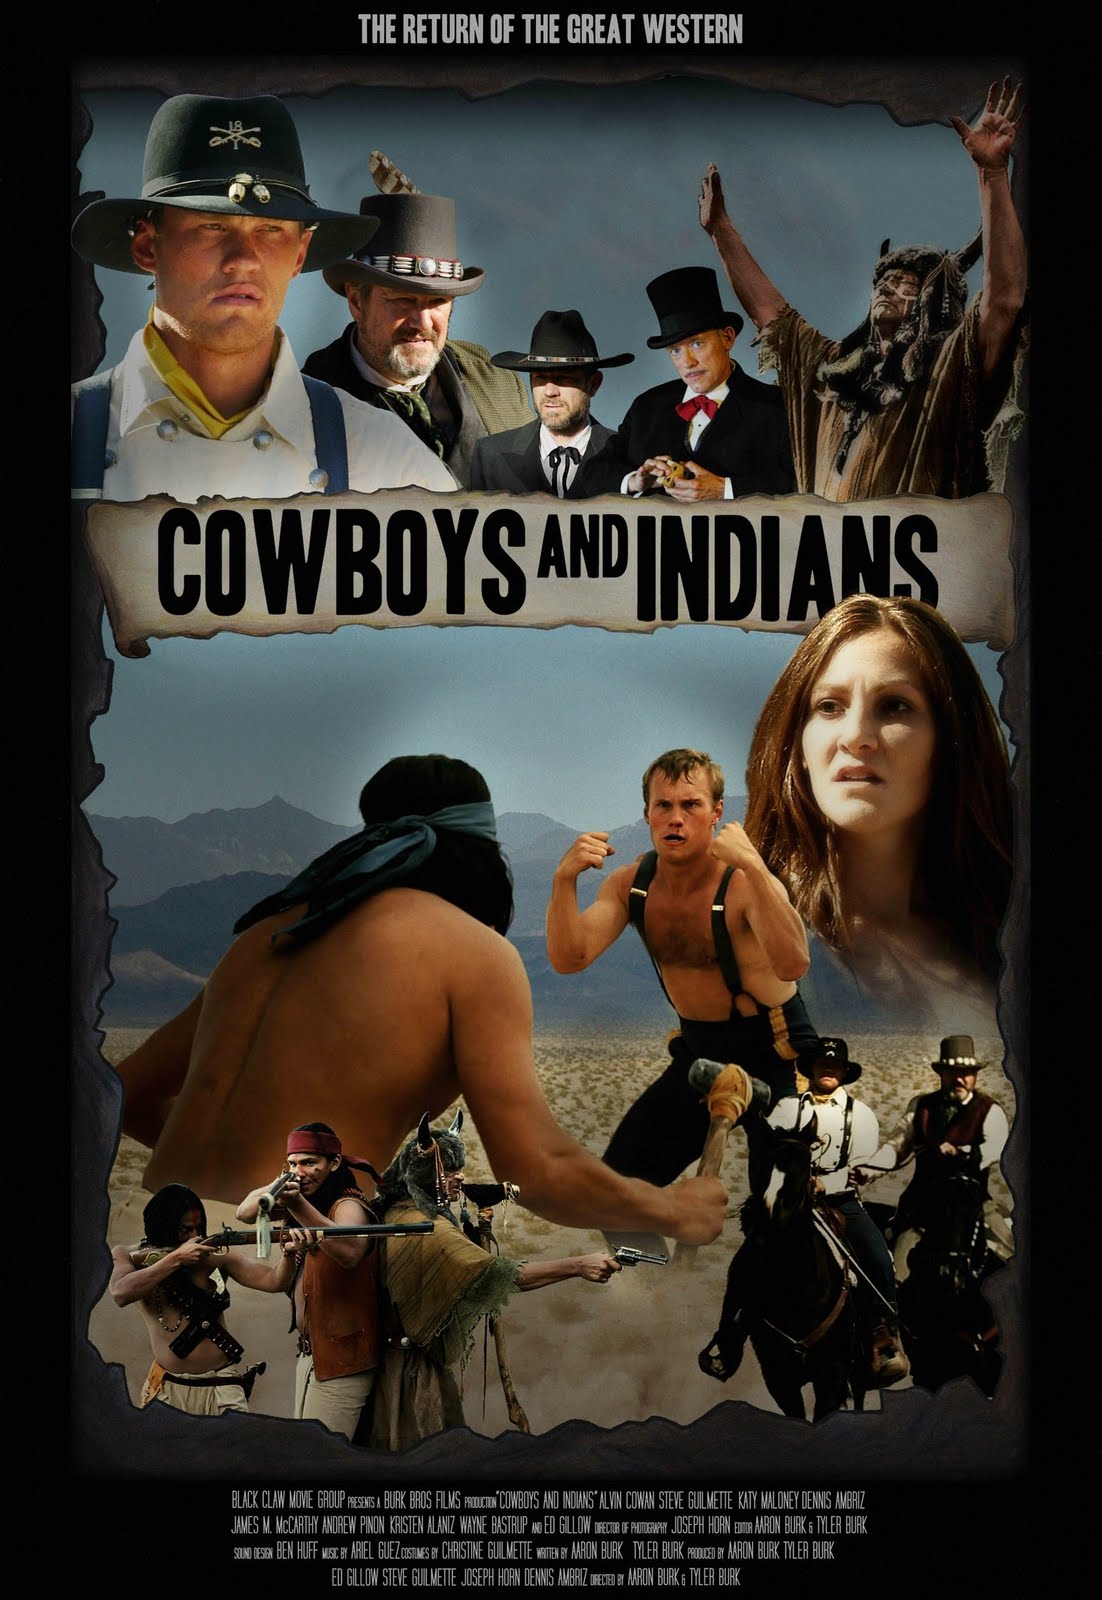 The Cowboy and the Indians movie